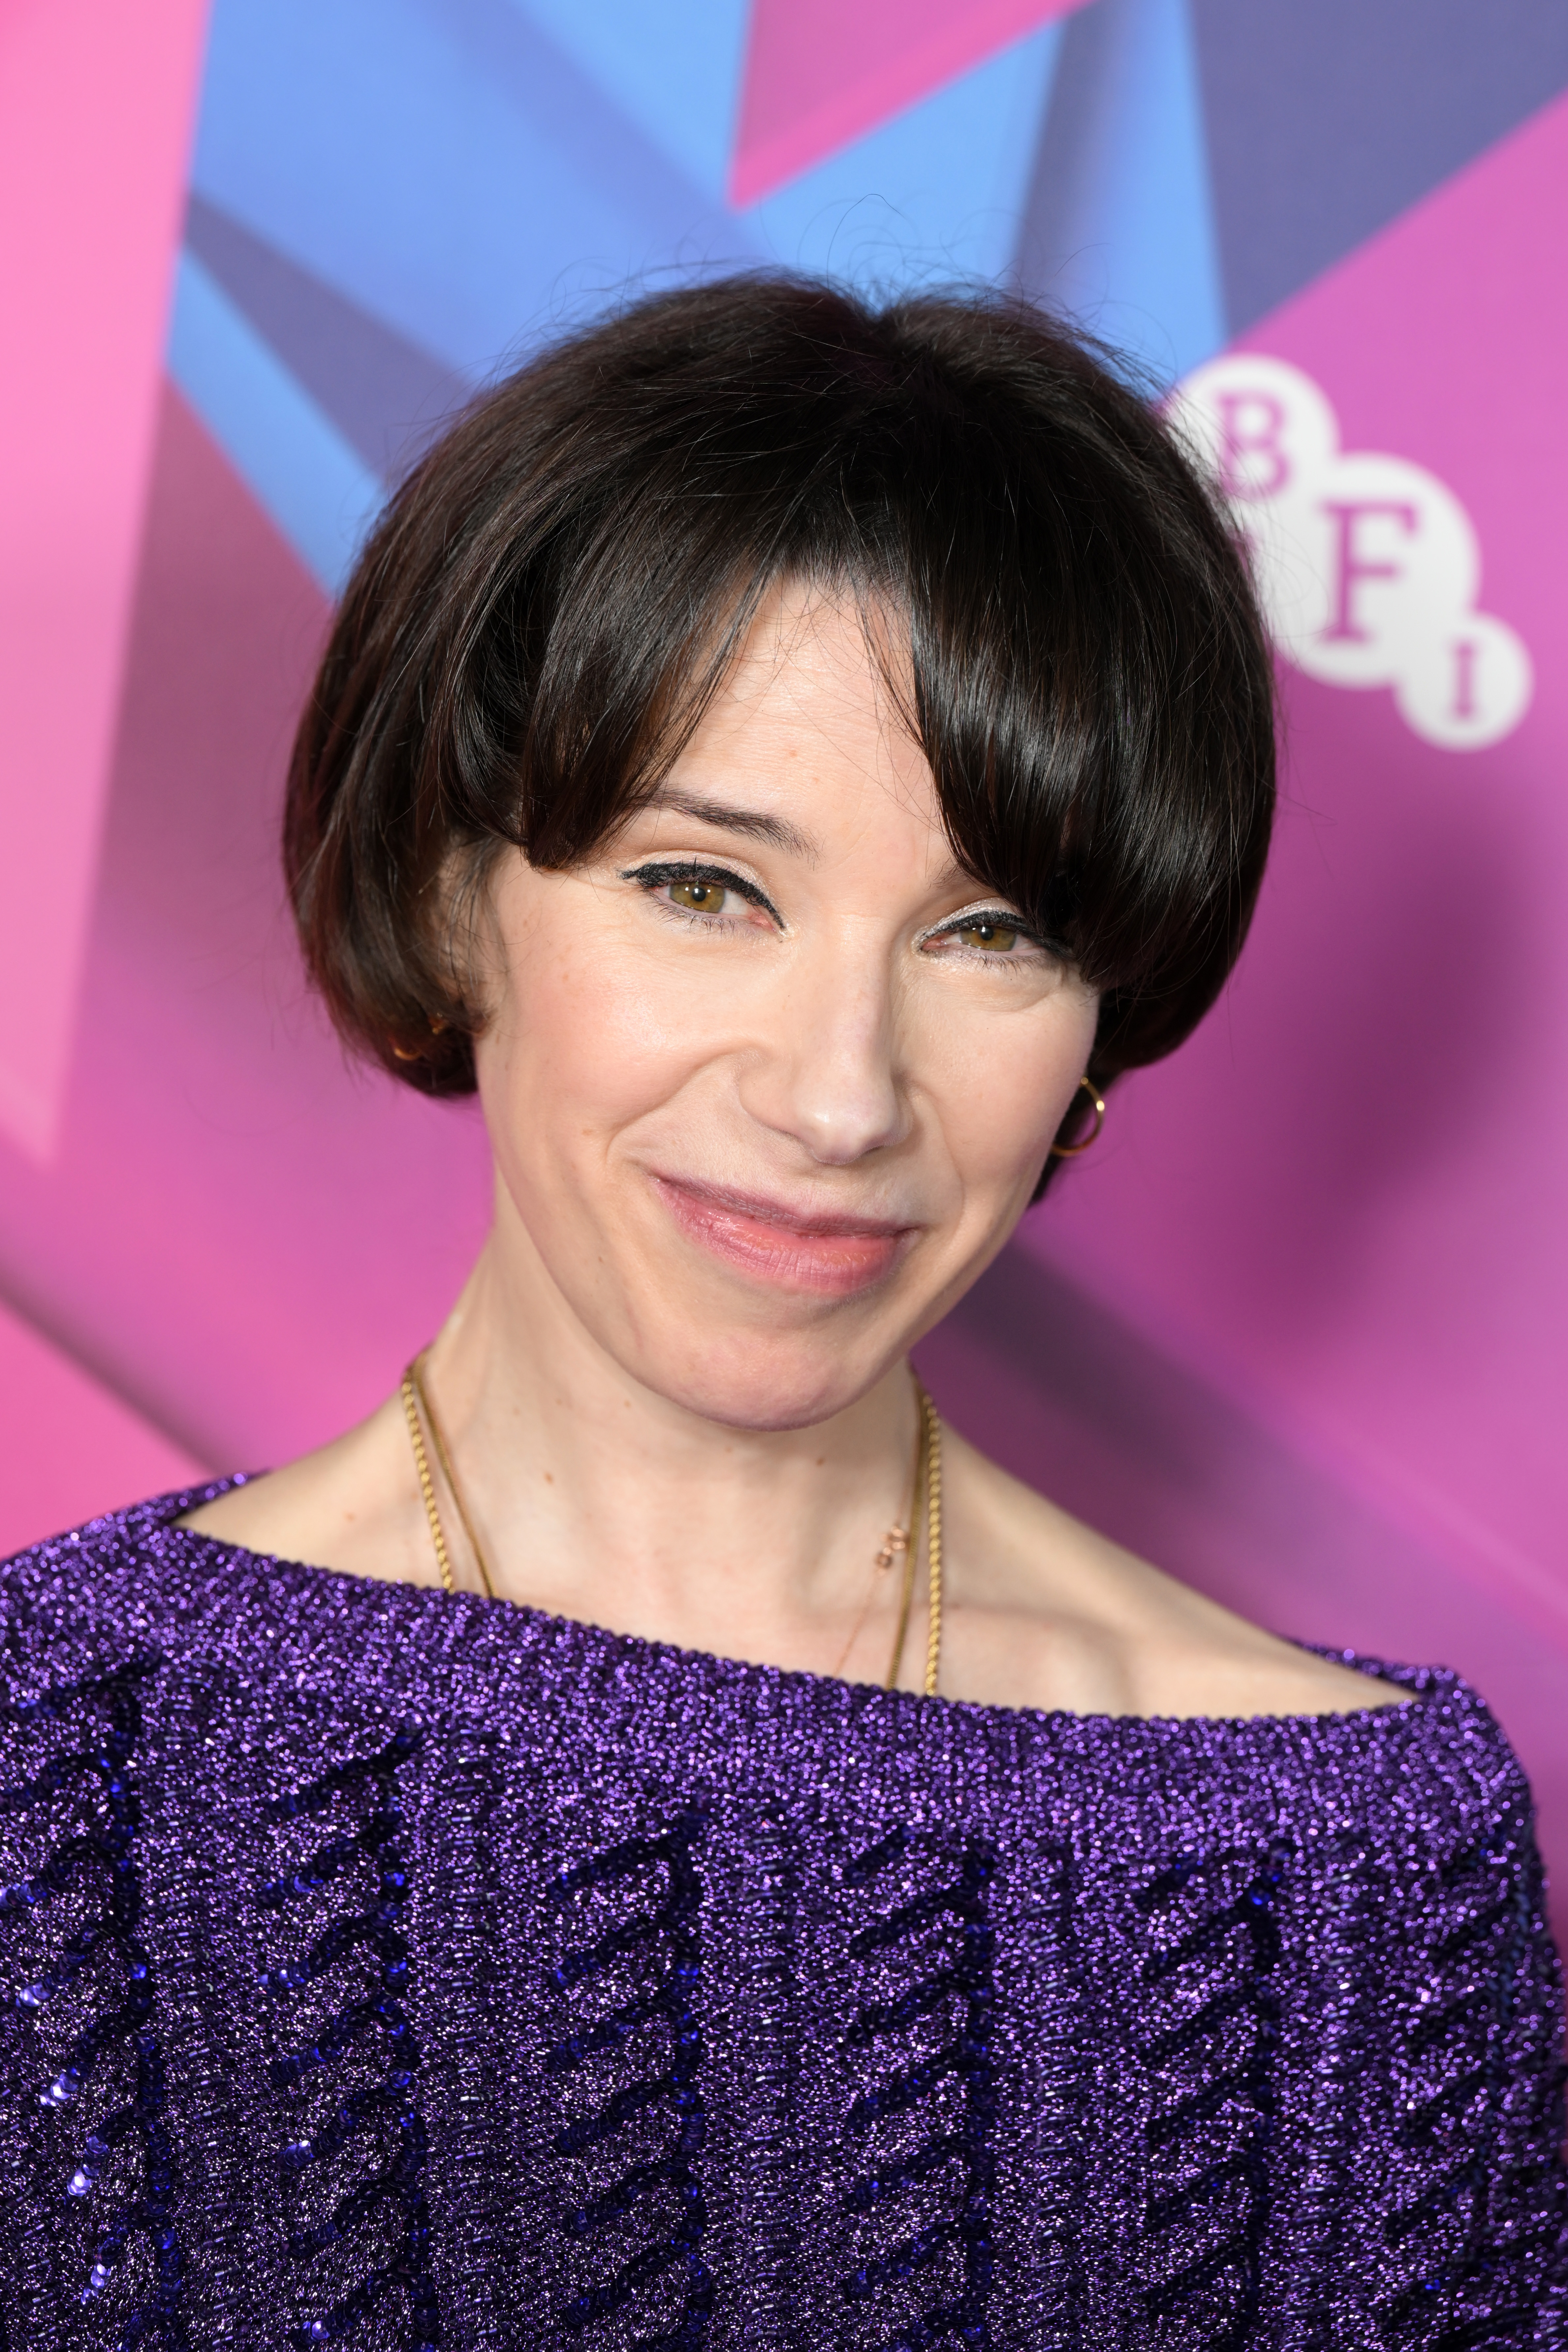 Sally Hawkins poses at the "Mammals" World Premiere during the 66th BFI London Film Festival at the Curzon Soho on October 7, 2022, in London, England | Source: Getty Images